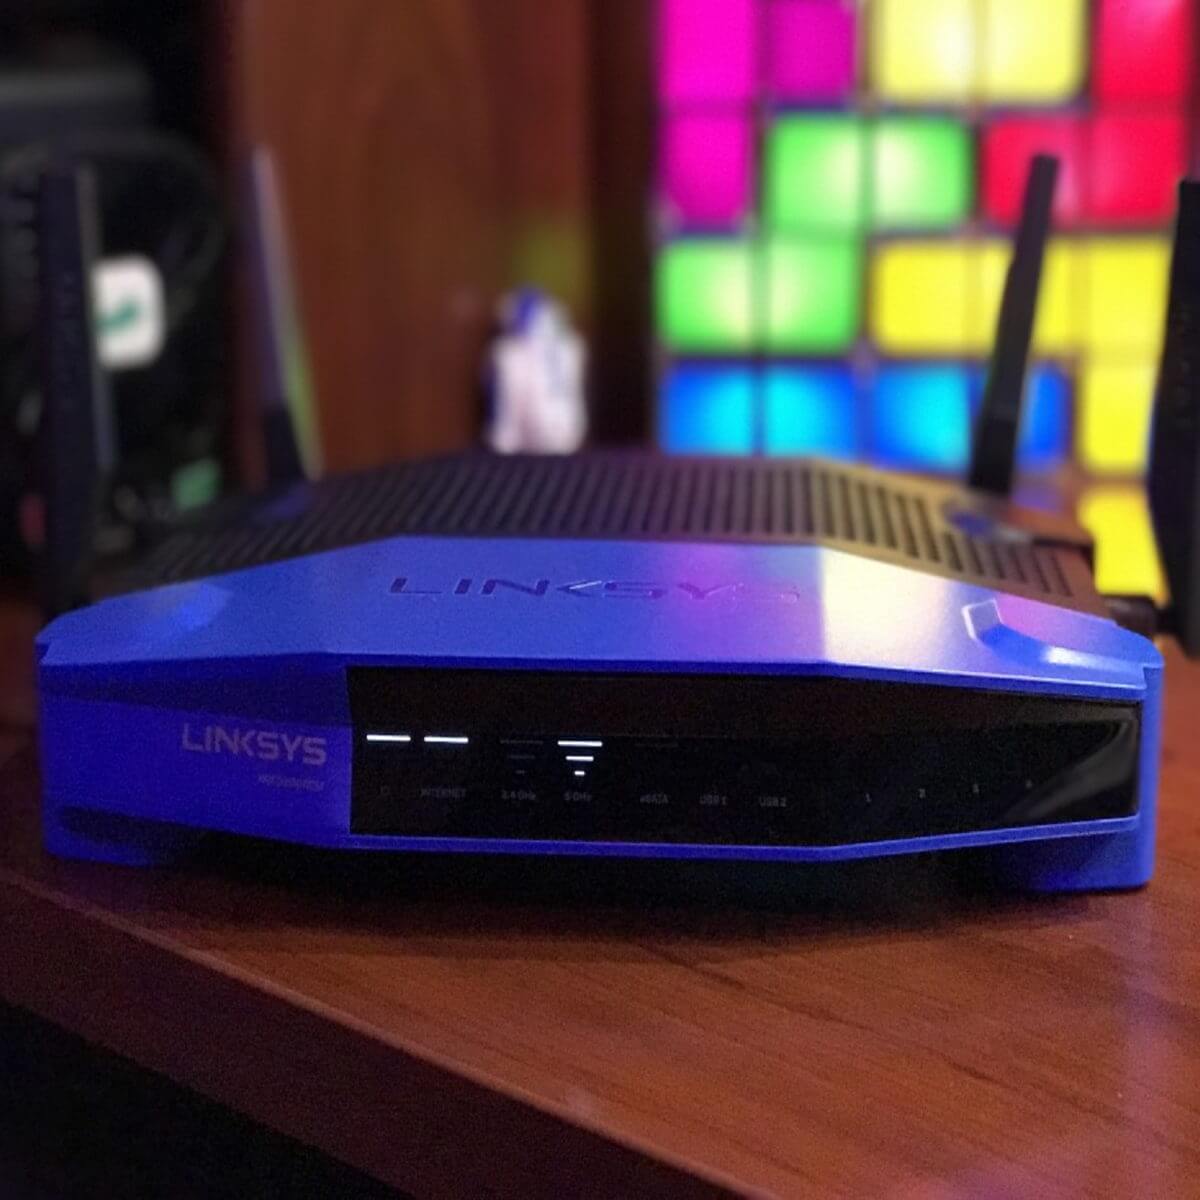 Linksys router not powering on